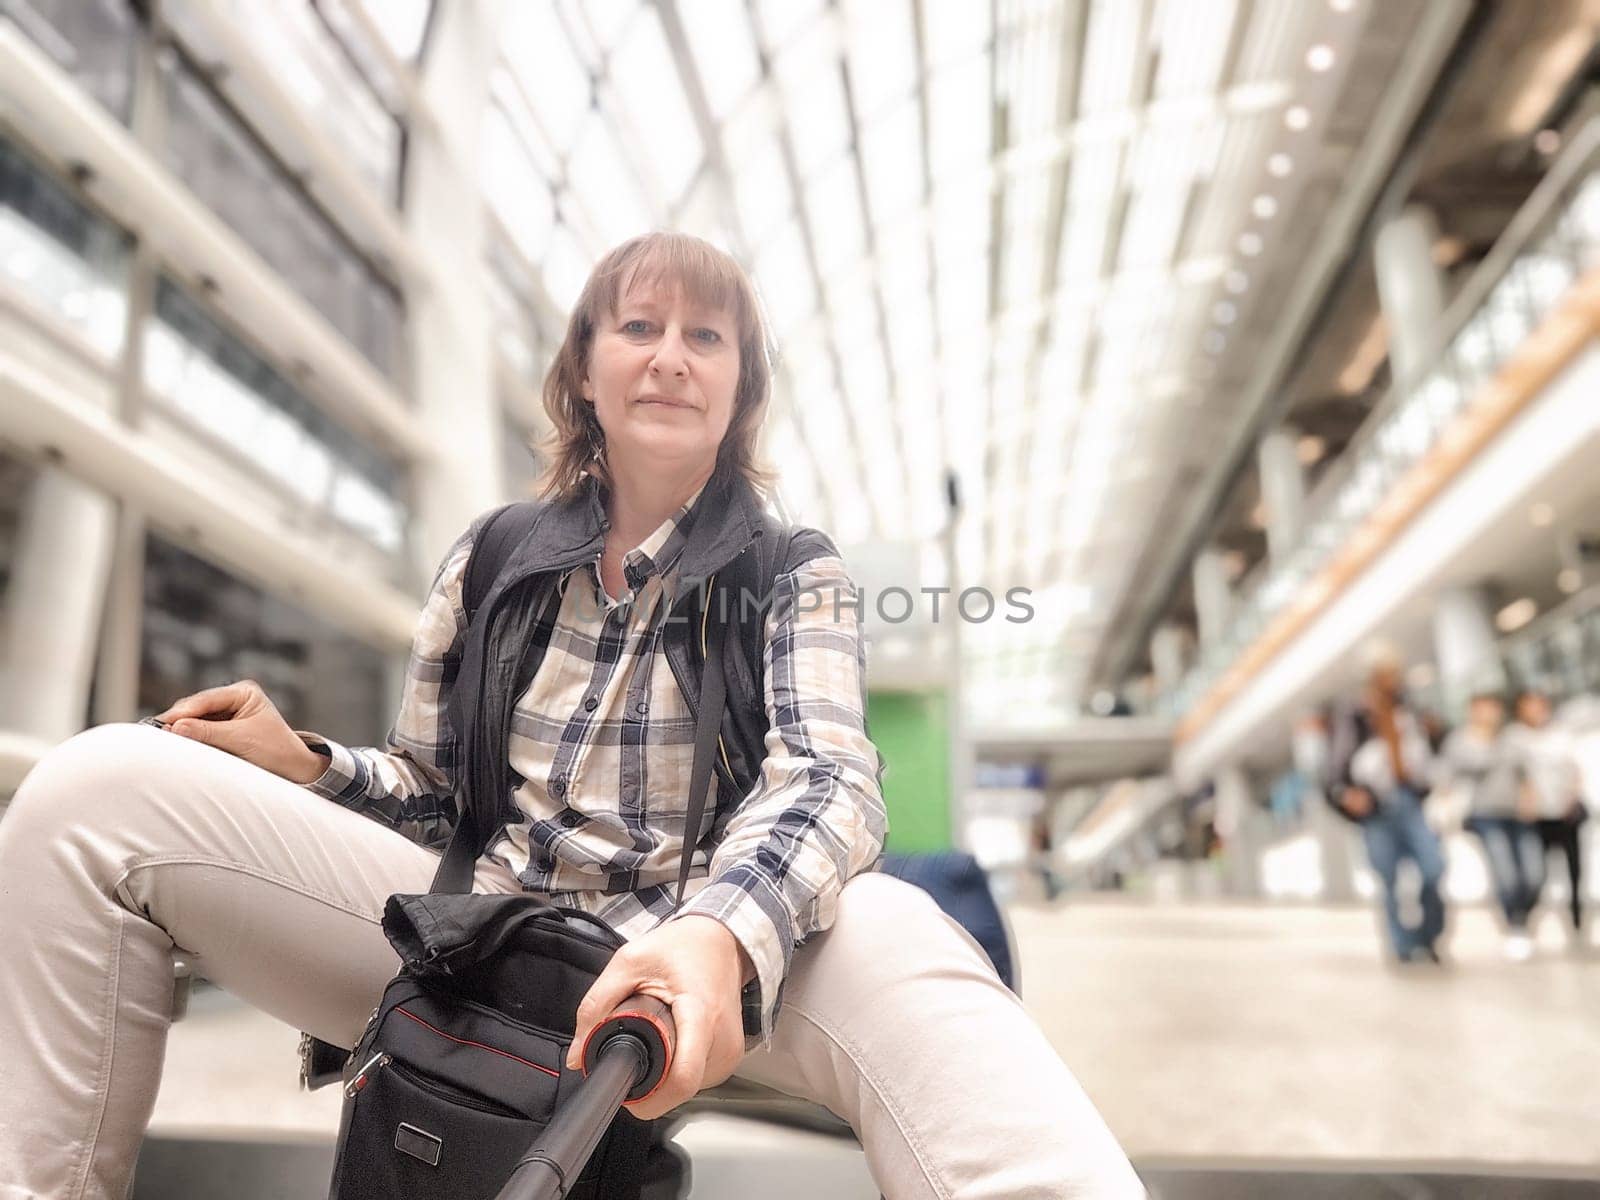 Middle-Aged Woman Taking Selfie at Airport Before Departure. A middle-aged woman captures selfie in an airy airport terminal